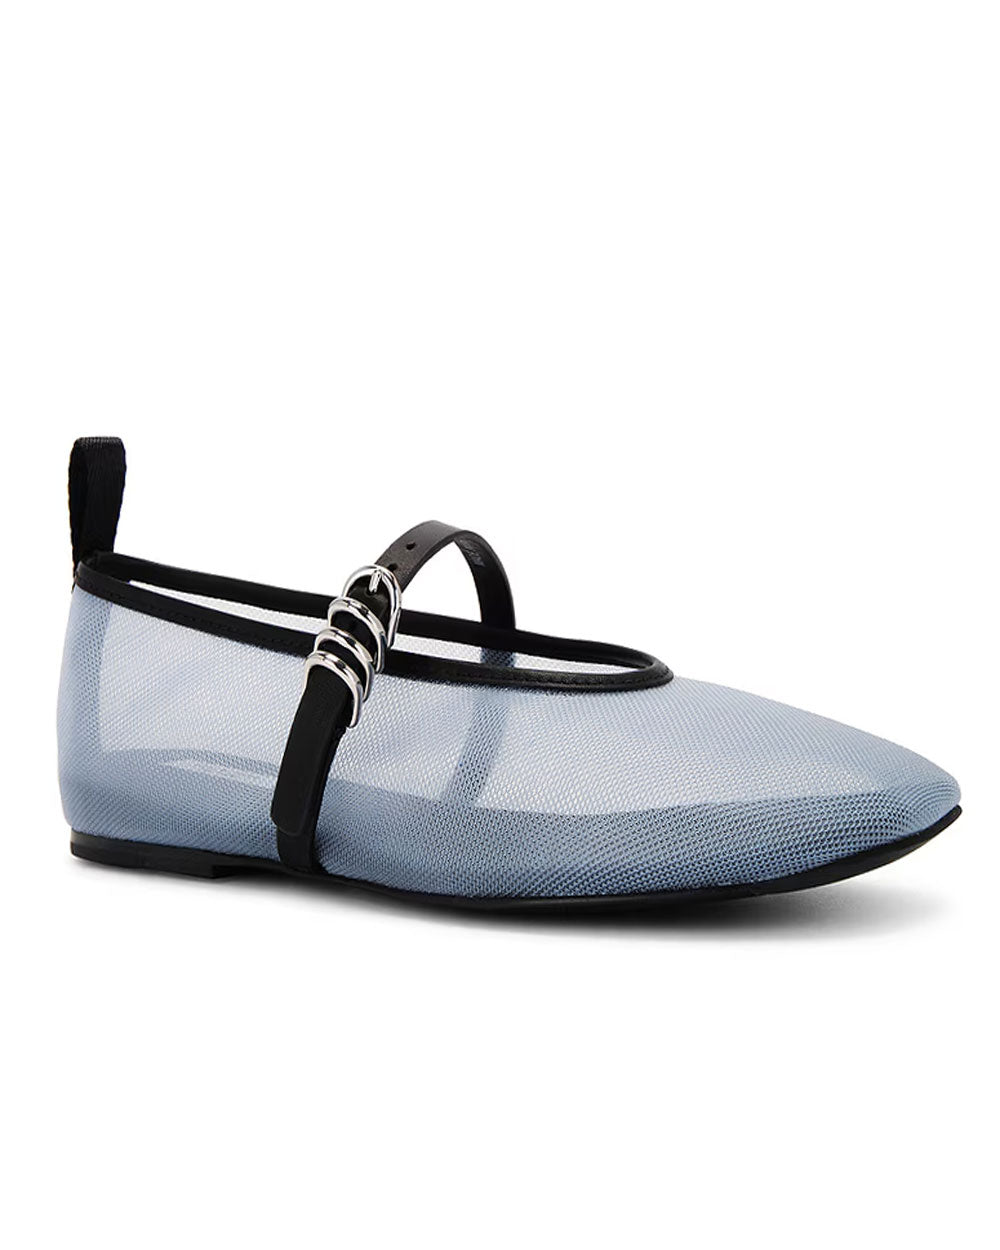 Spire Mary Jane in Ice Blue